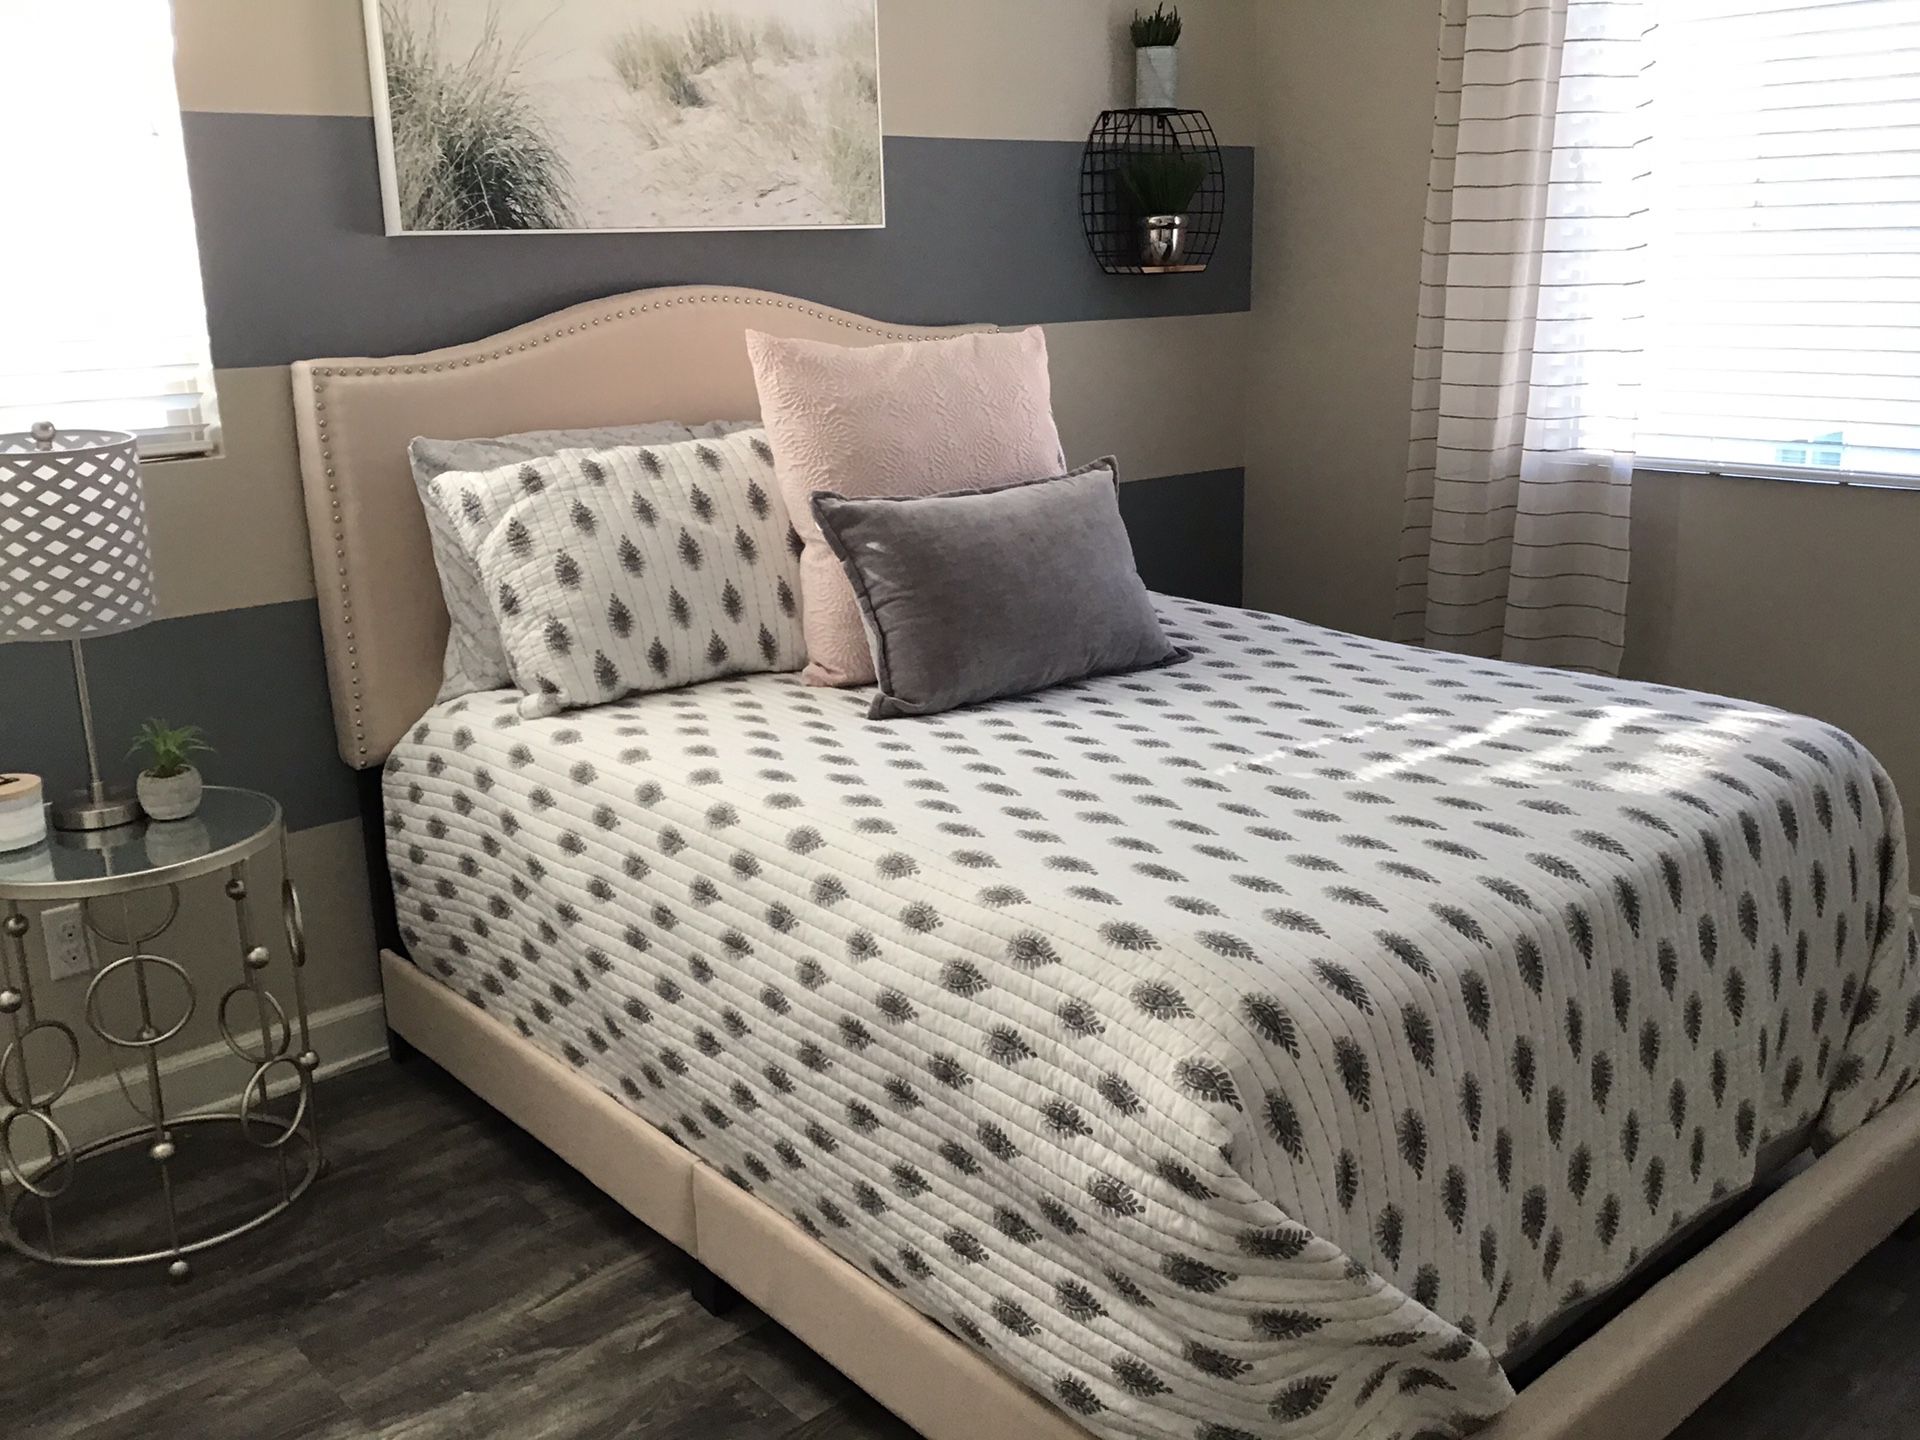 Full size bed frame and new mattress